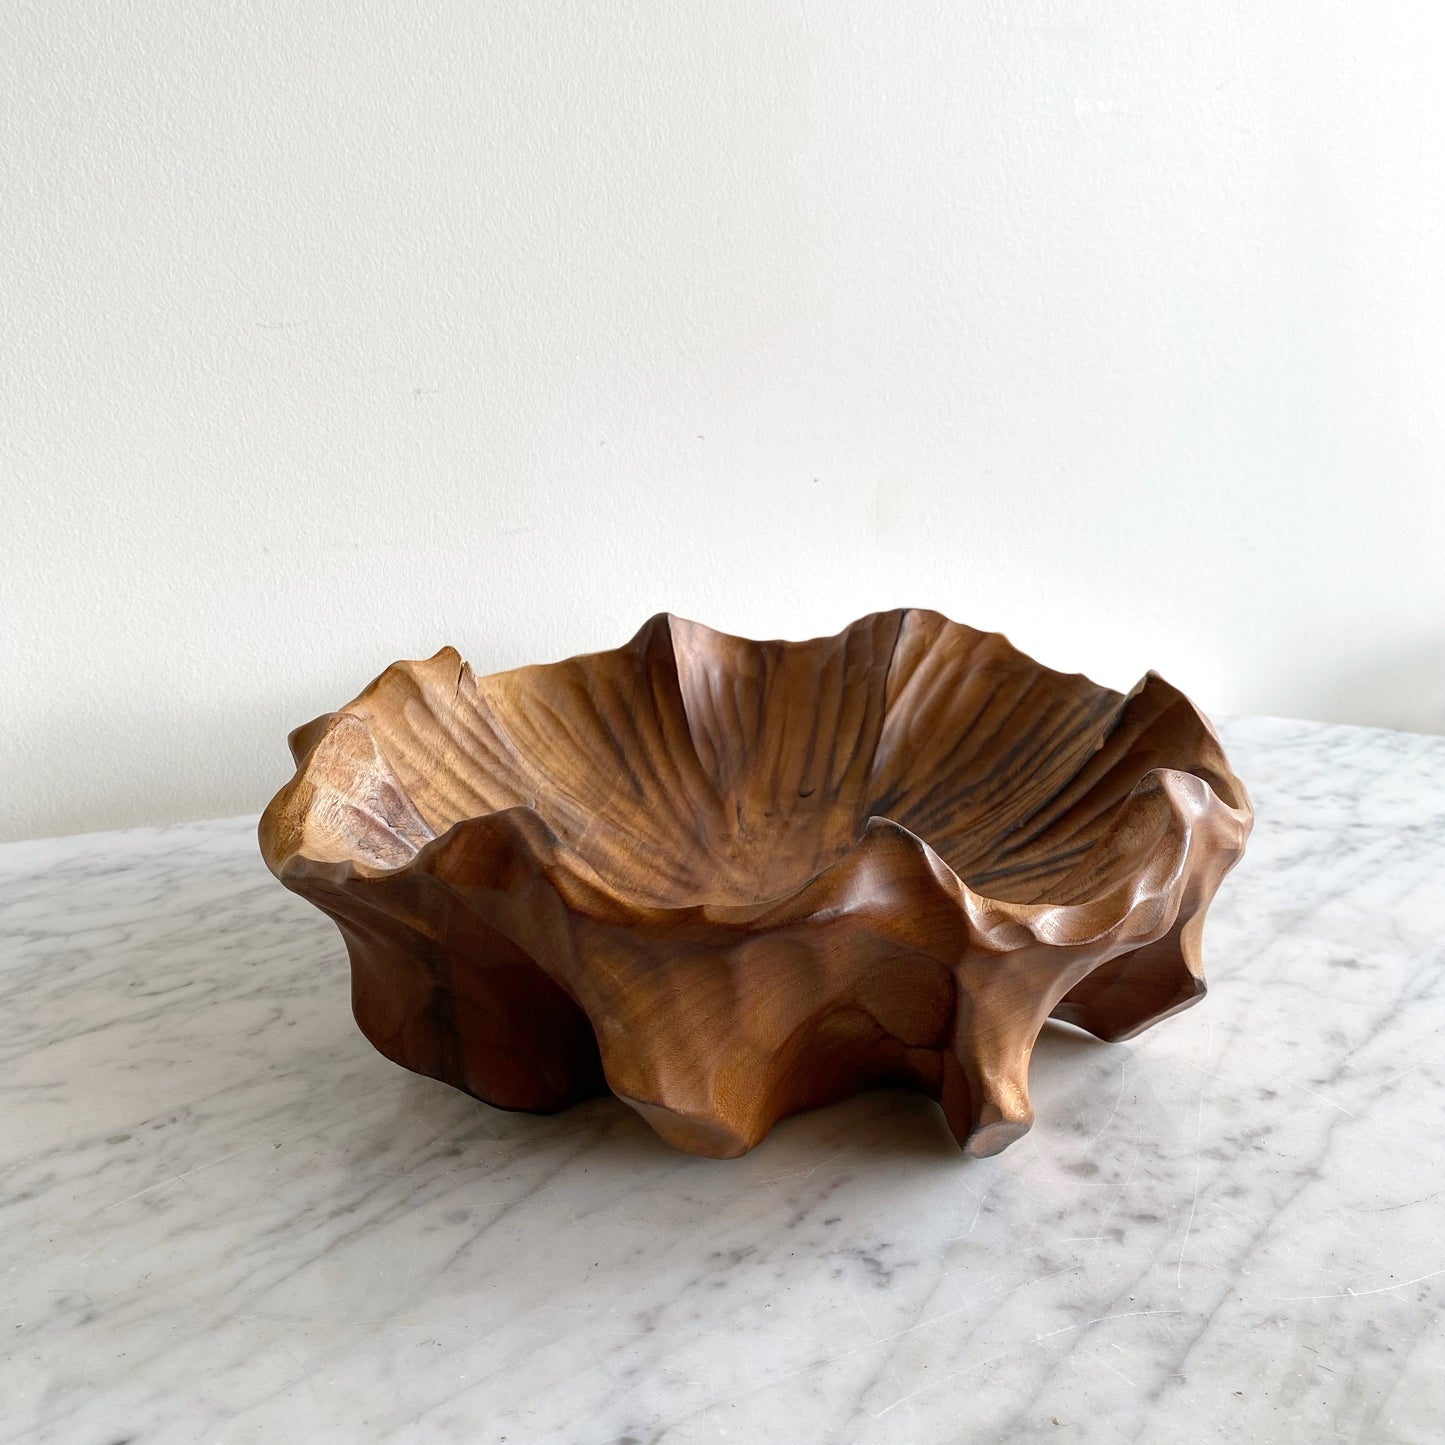 Found Carved Wooden Bowl